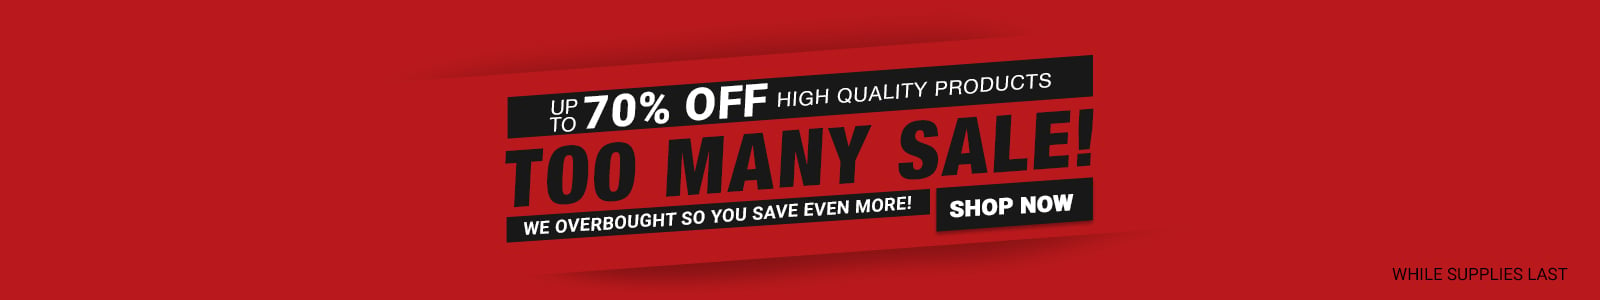 The Too Many Sale!

We overbought so you save even more! 
Up to 85% off high quality products
While Supplies Last
Shop Now